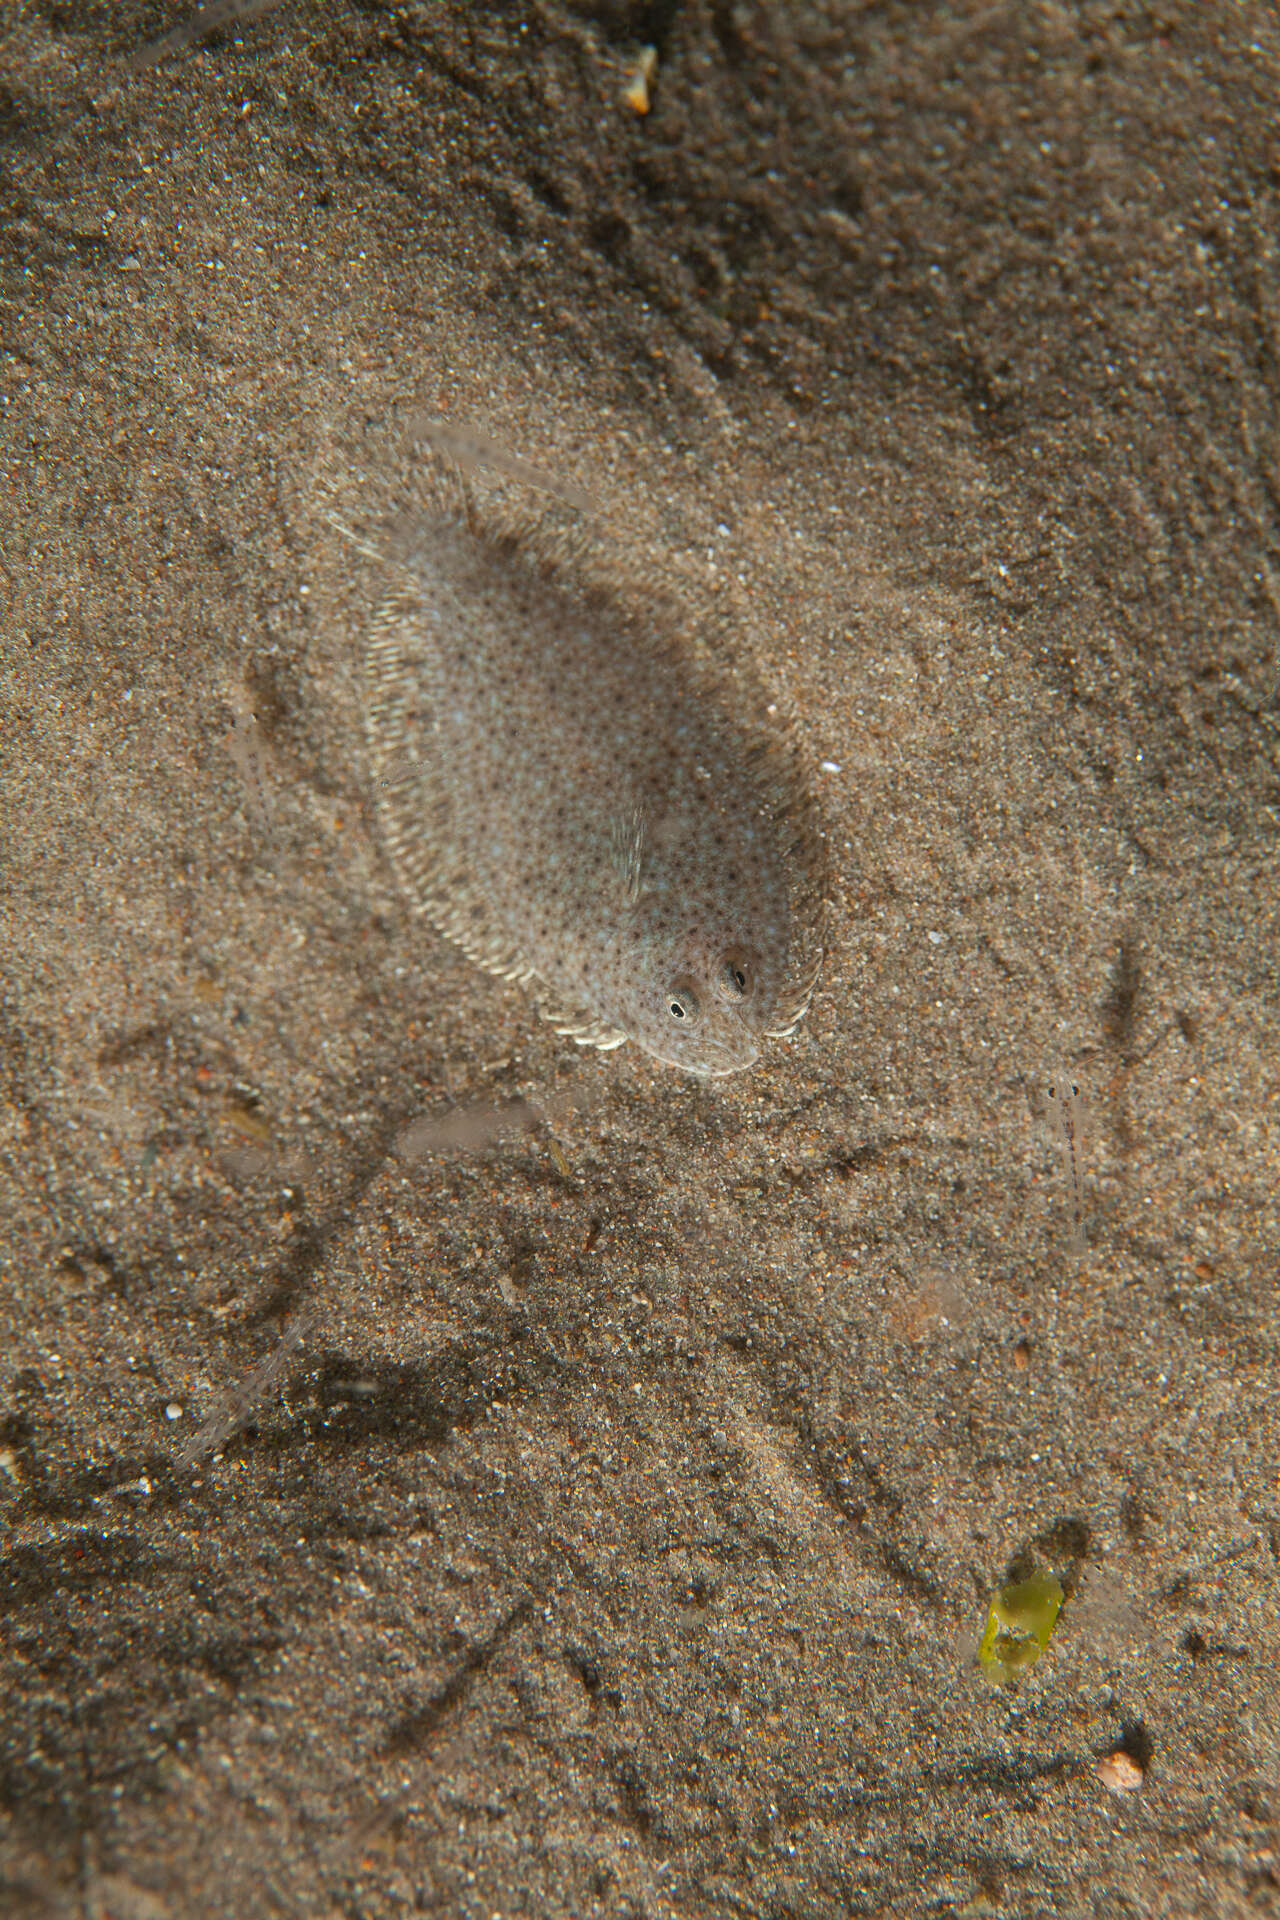 Image of Remo flounder